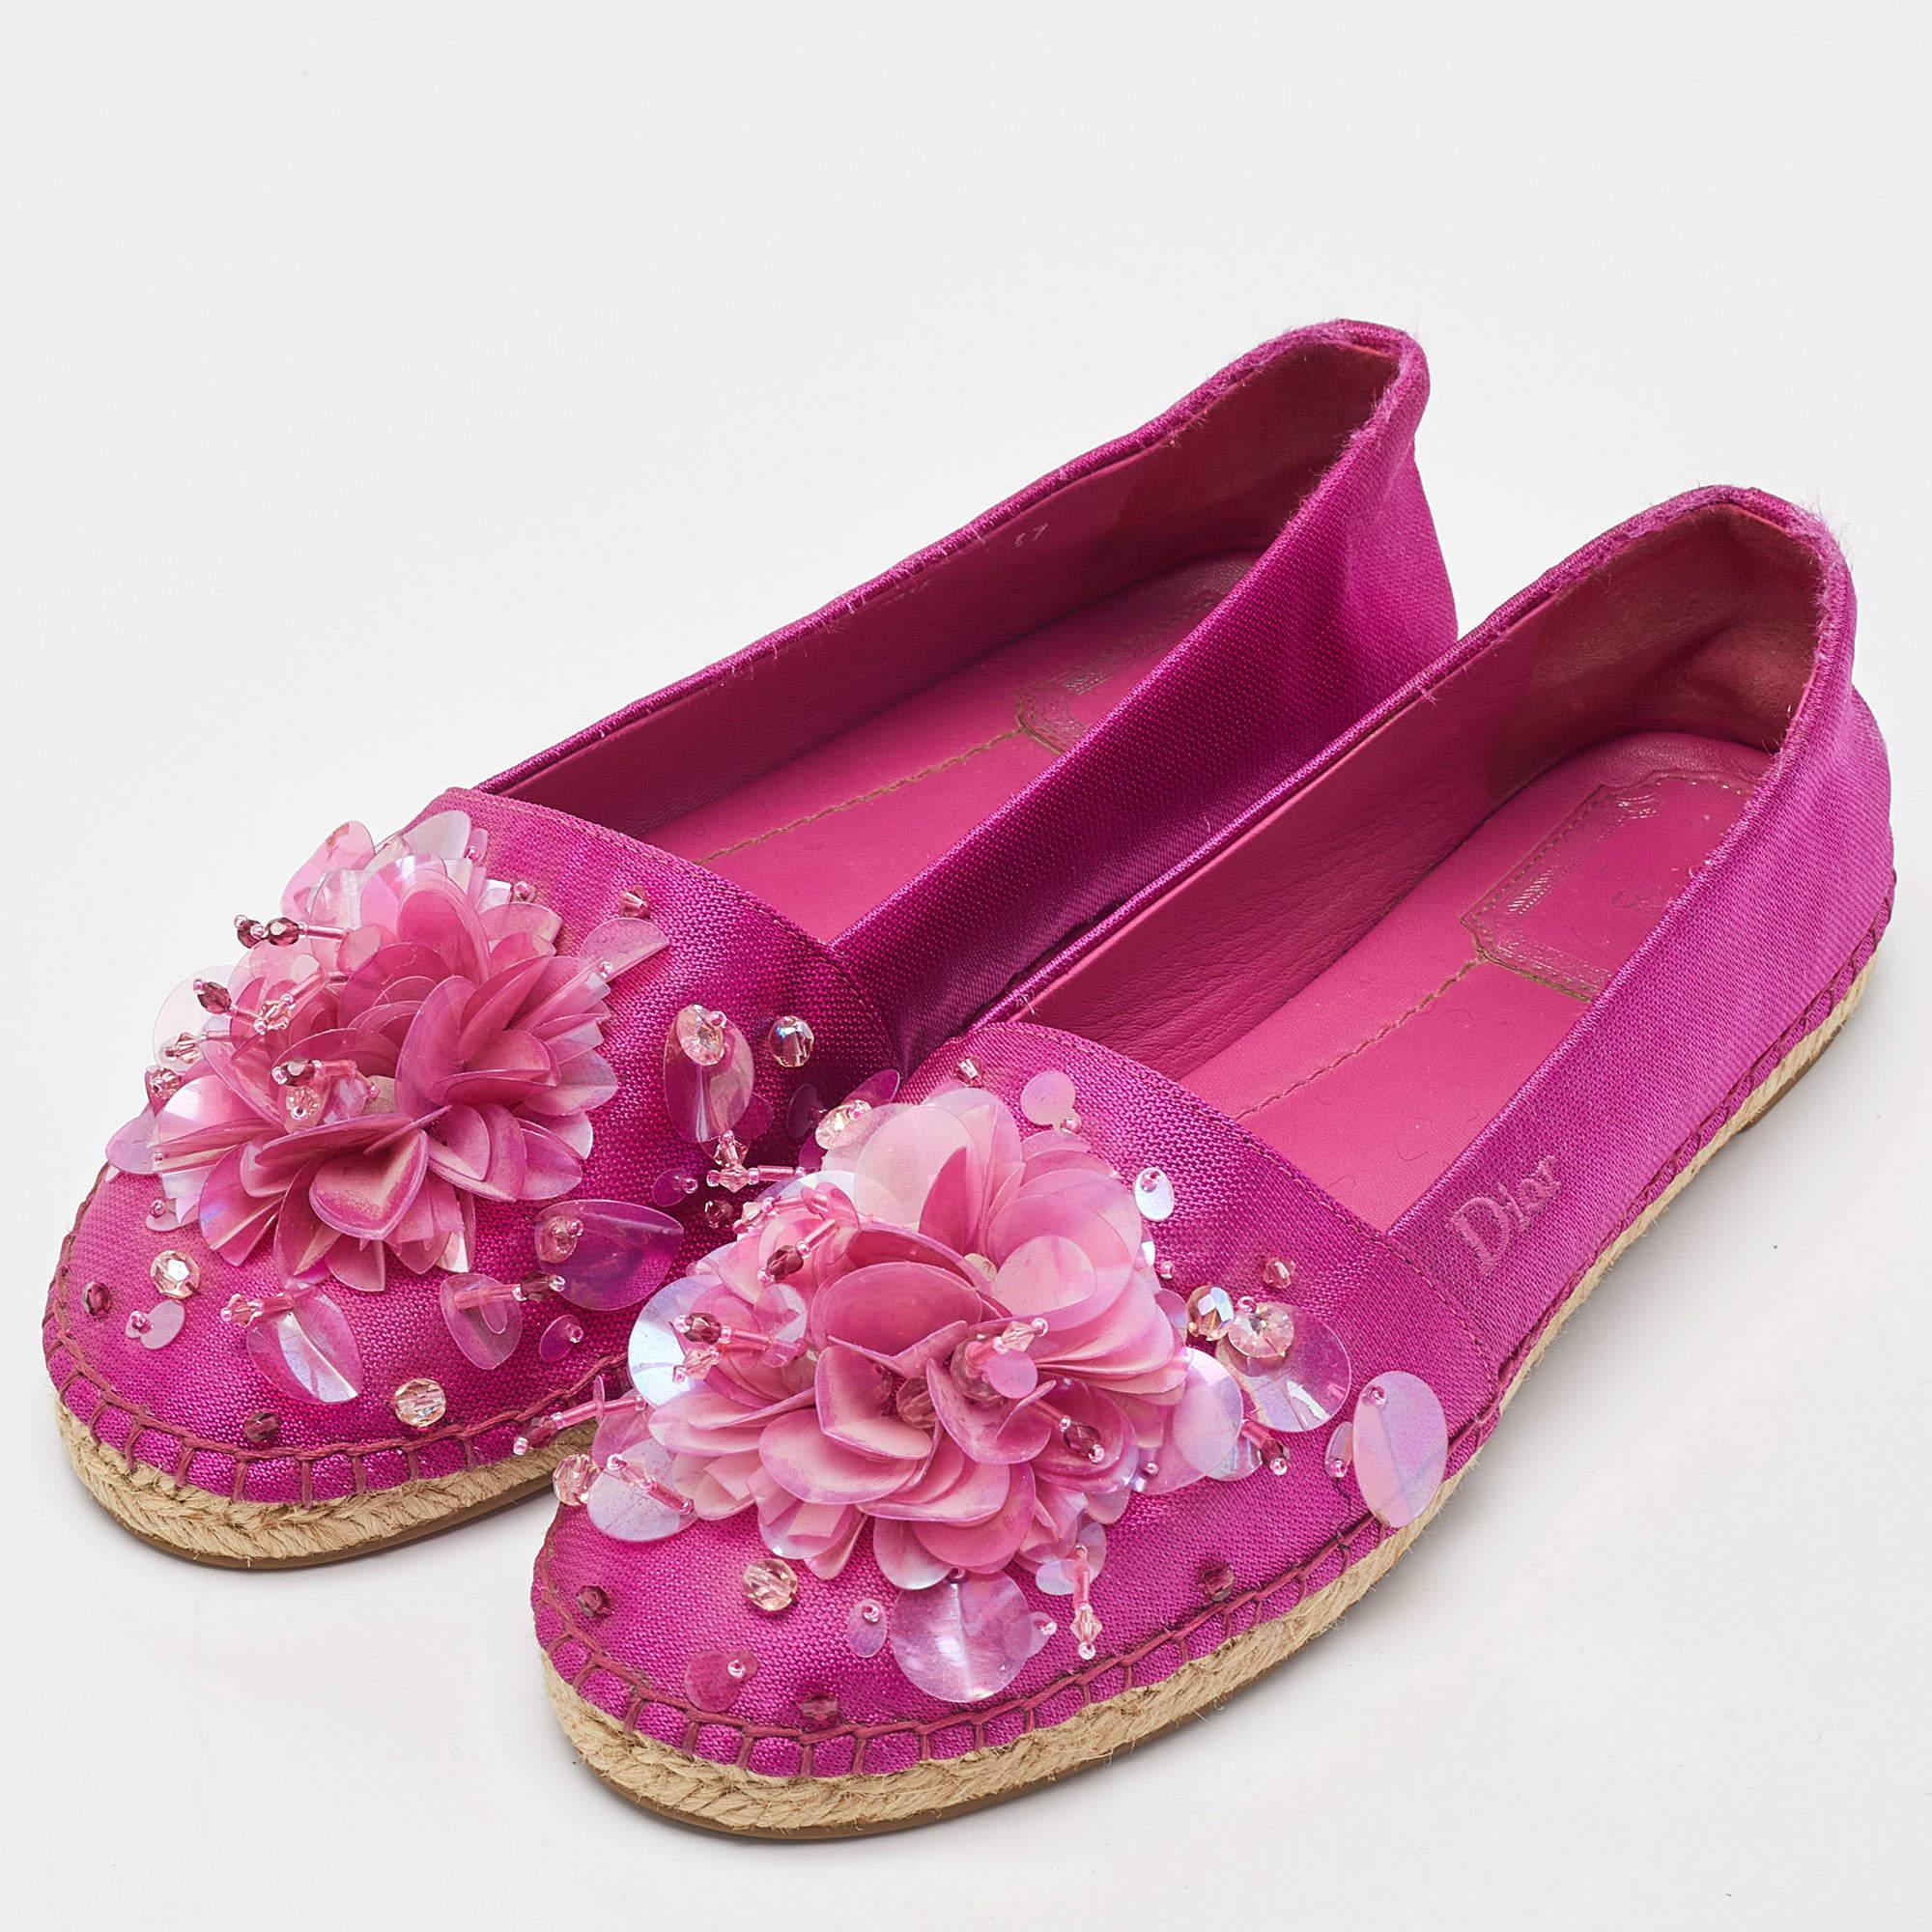 A perfect blend of luxury, style, and comfort, these designer flats are made using quality materials and frame your feet in the most elegant way. They can be paired with a host of outfits from your wardrobe.

